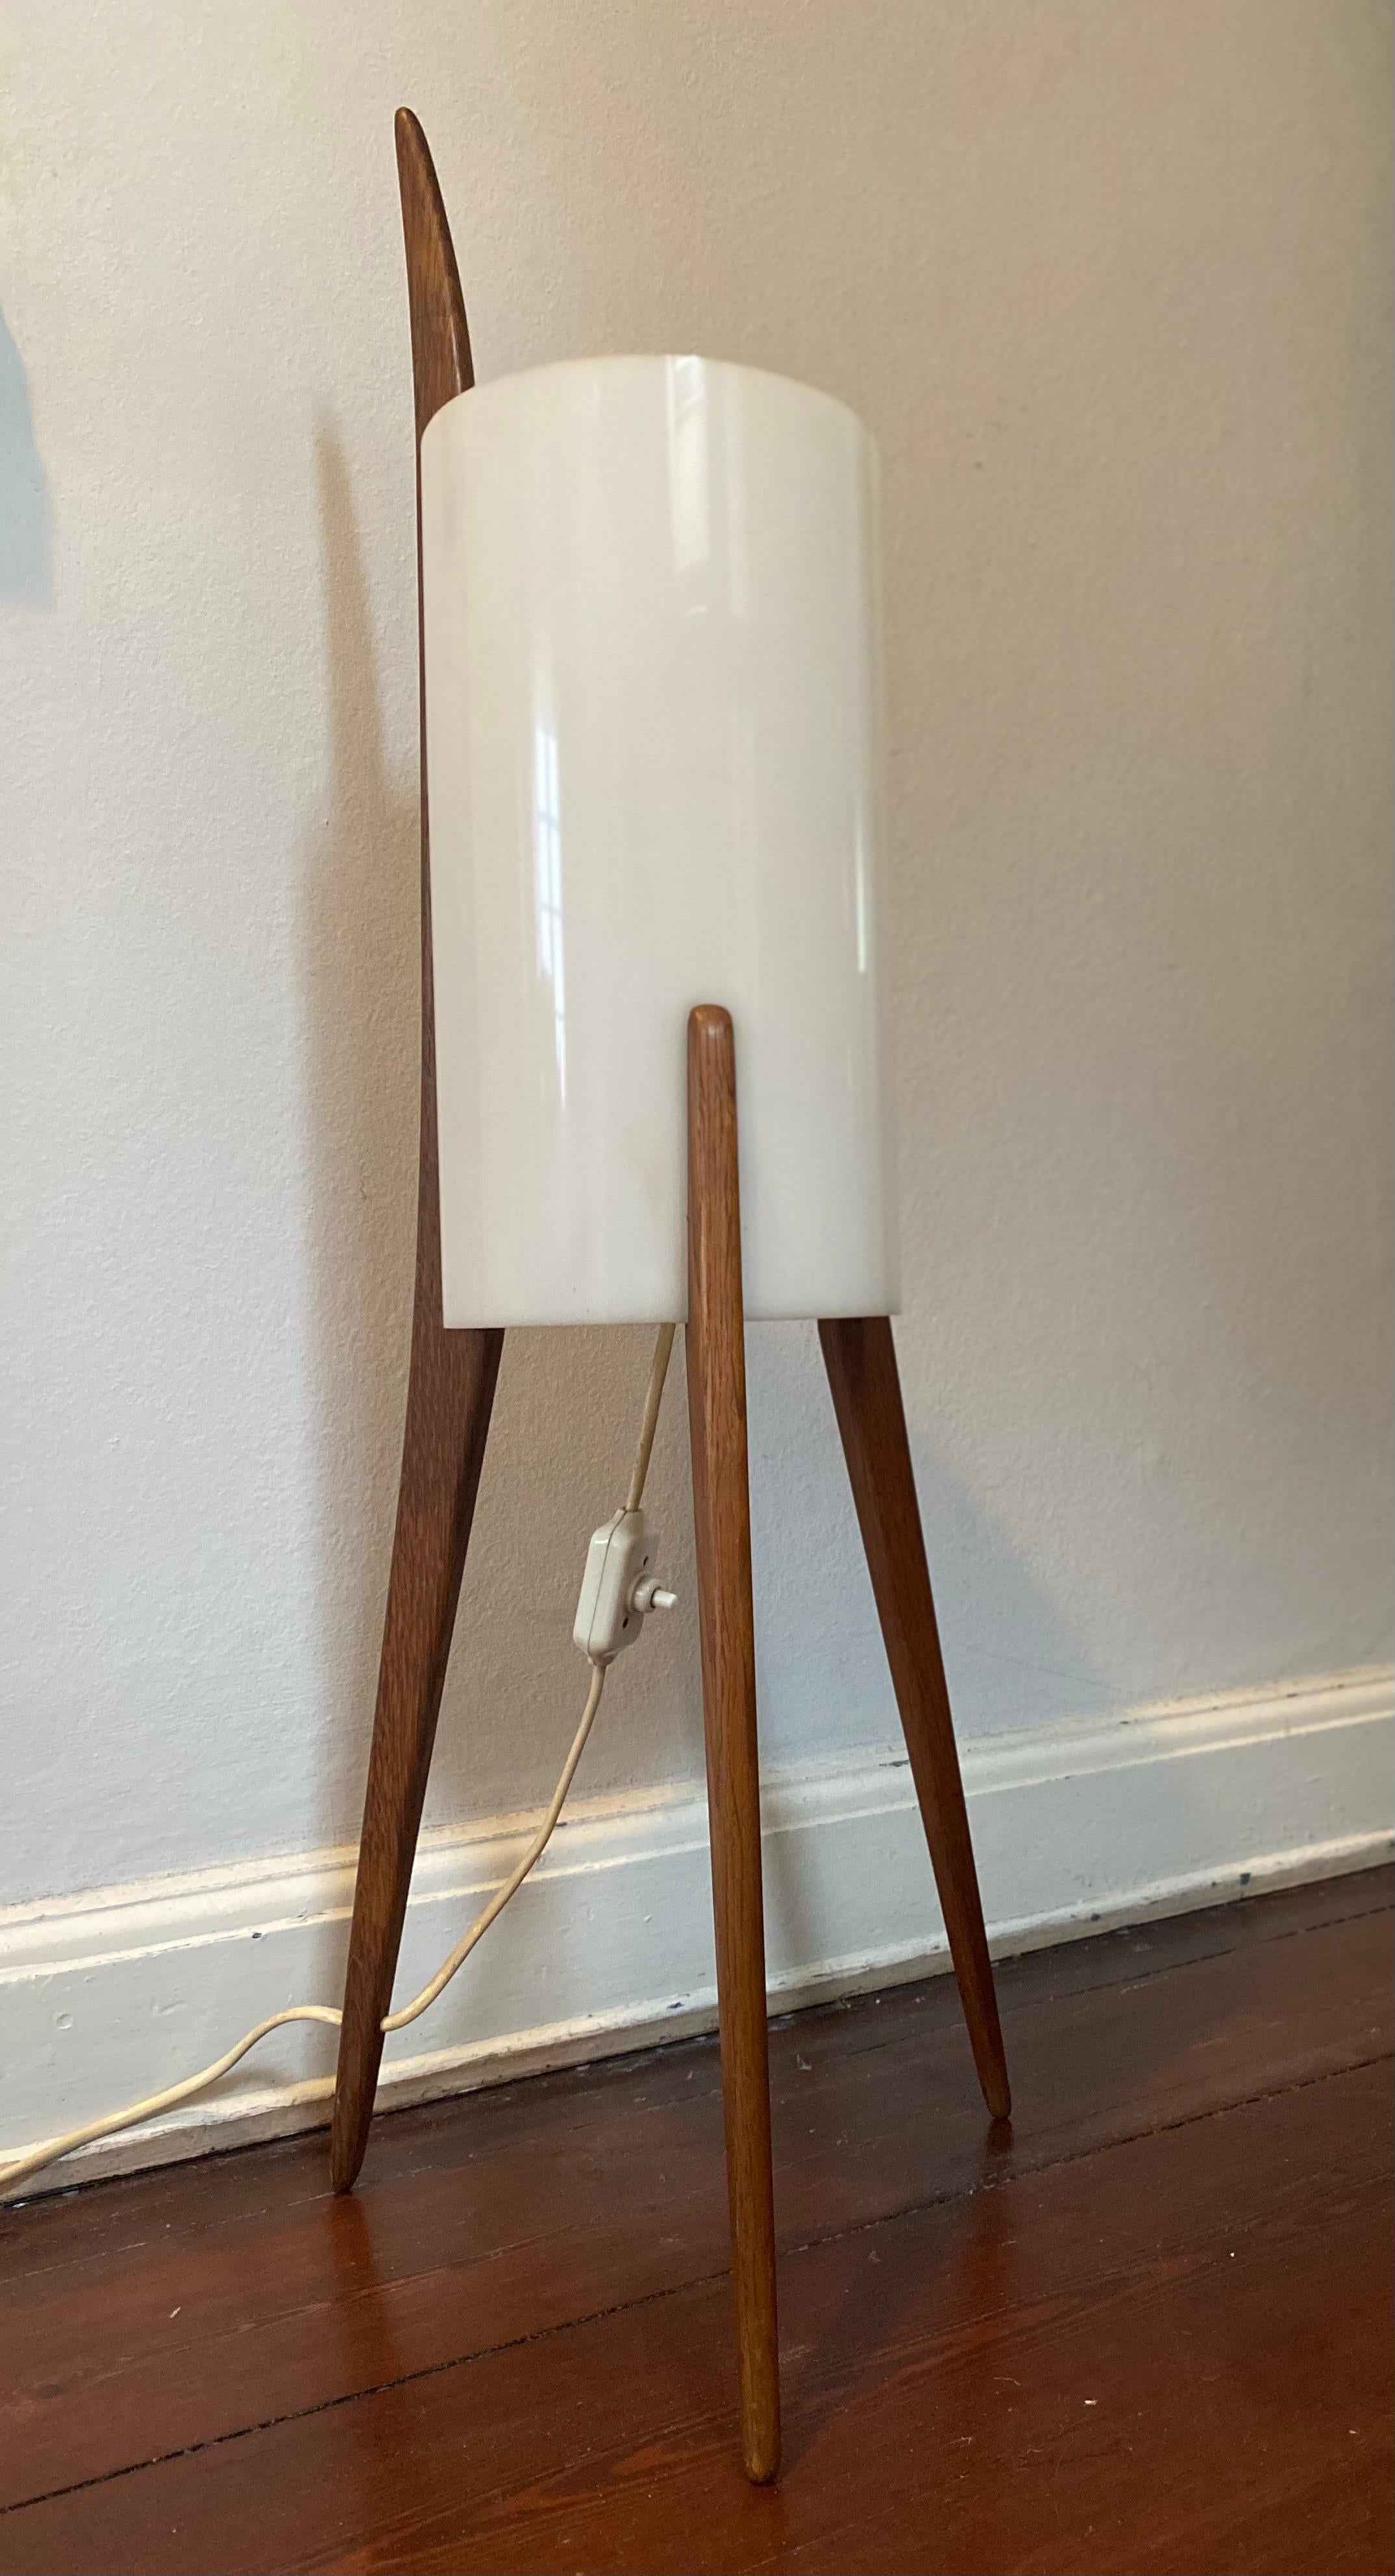 This rare floor lamp (model no. 308) was designed by Uno & Östen Kristiansson for Luxus in the 1960's in Sweden. The three-legged stand is made from oak and the cylander shaped shade is of Plexiglass, which gives it a beautiful soft light. It is not